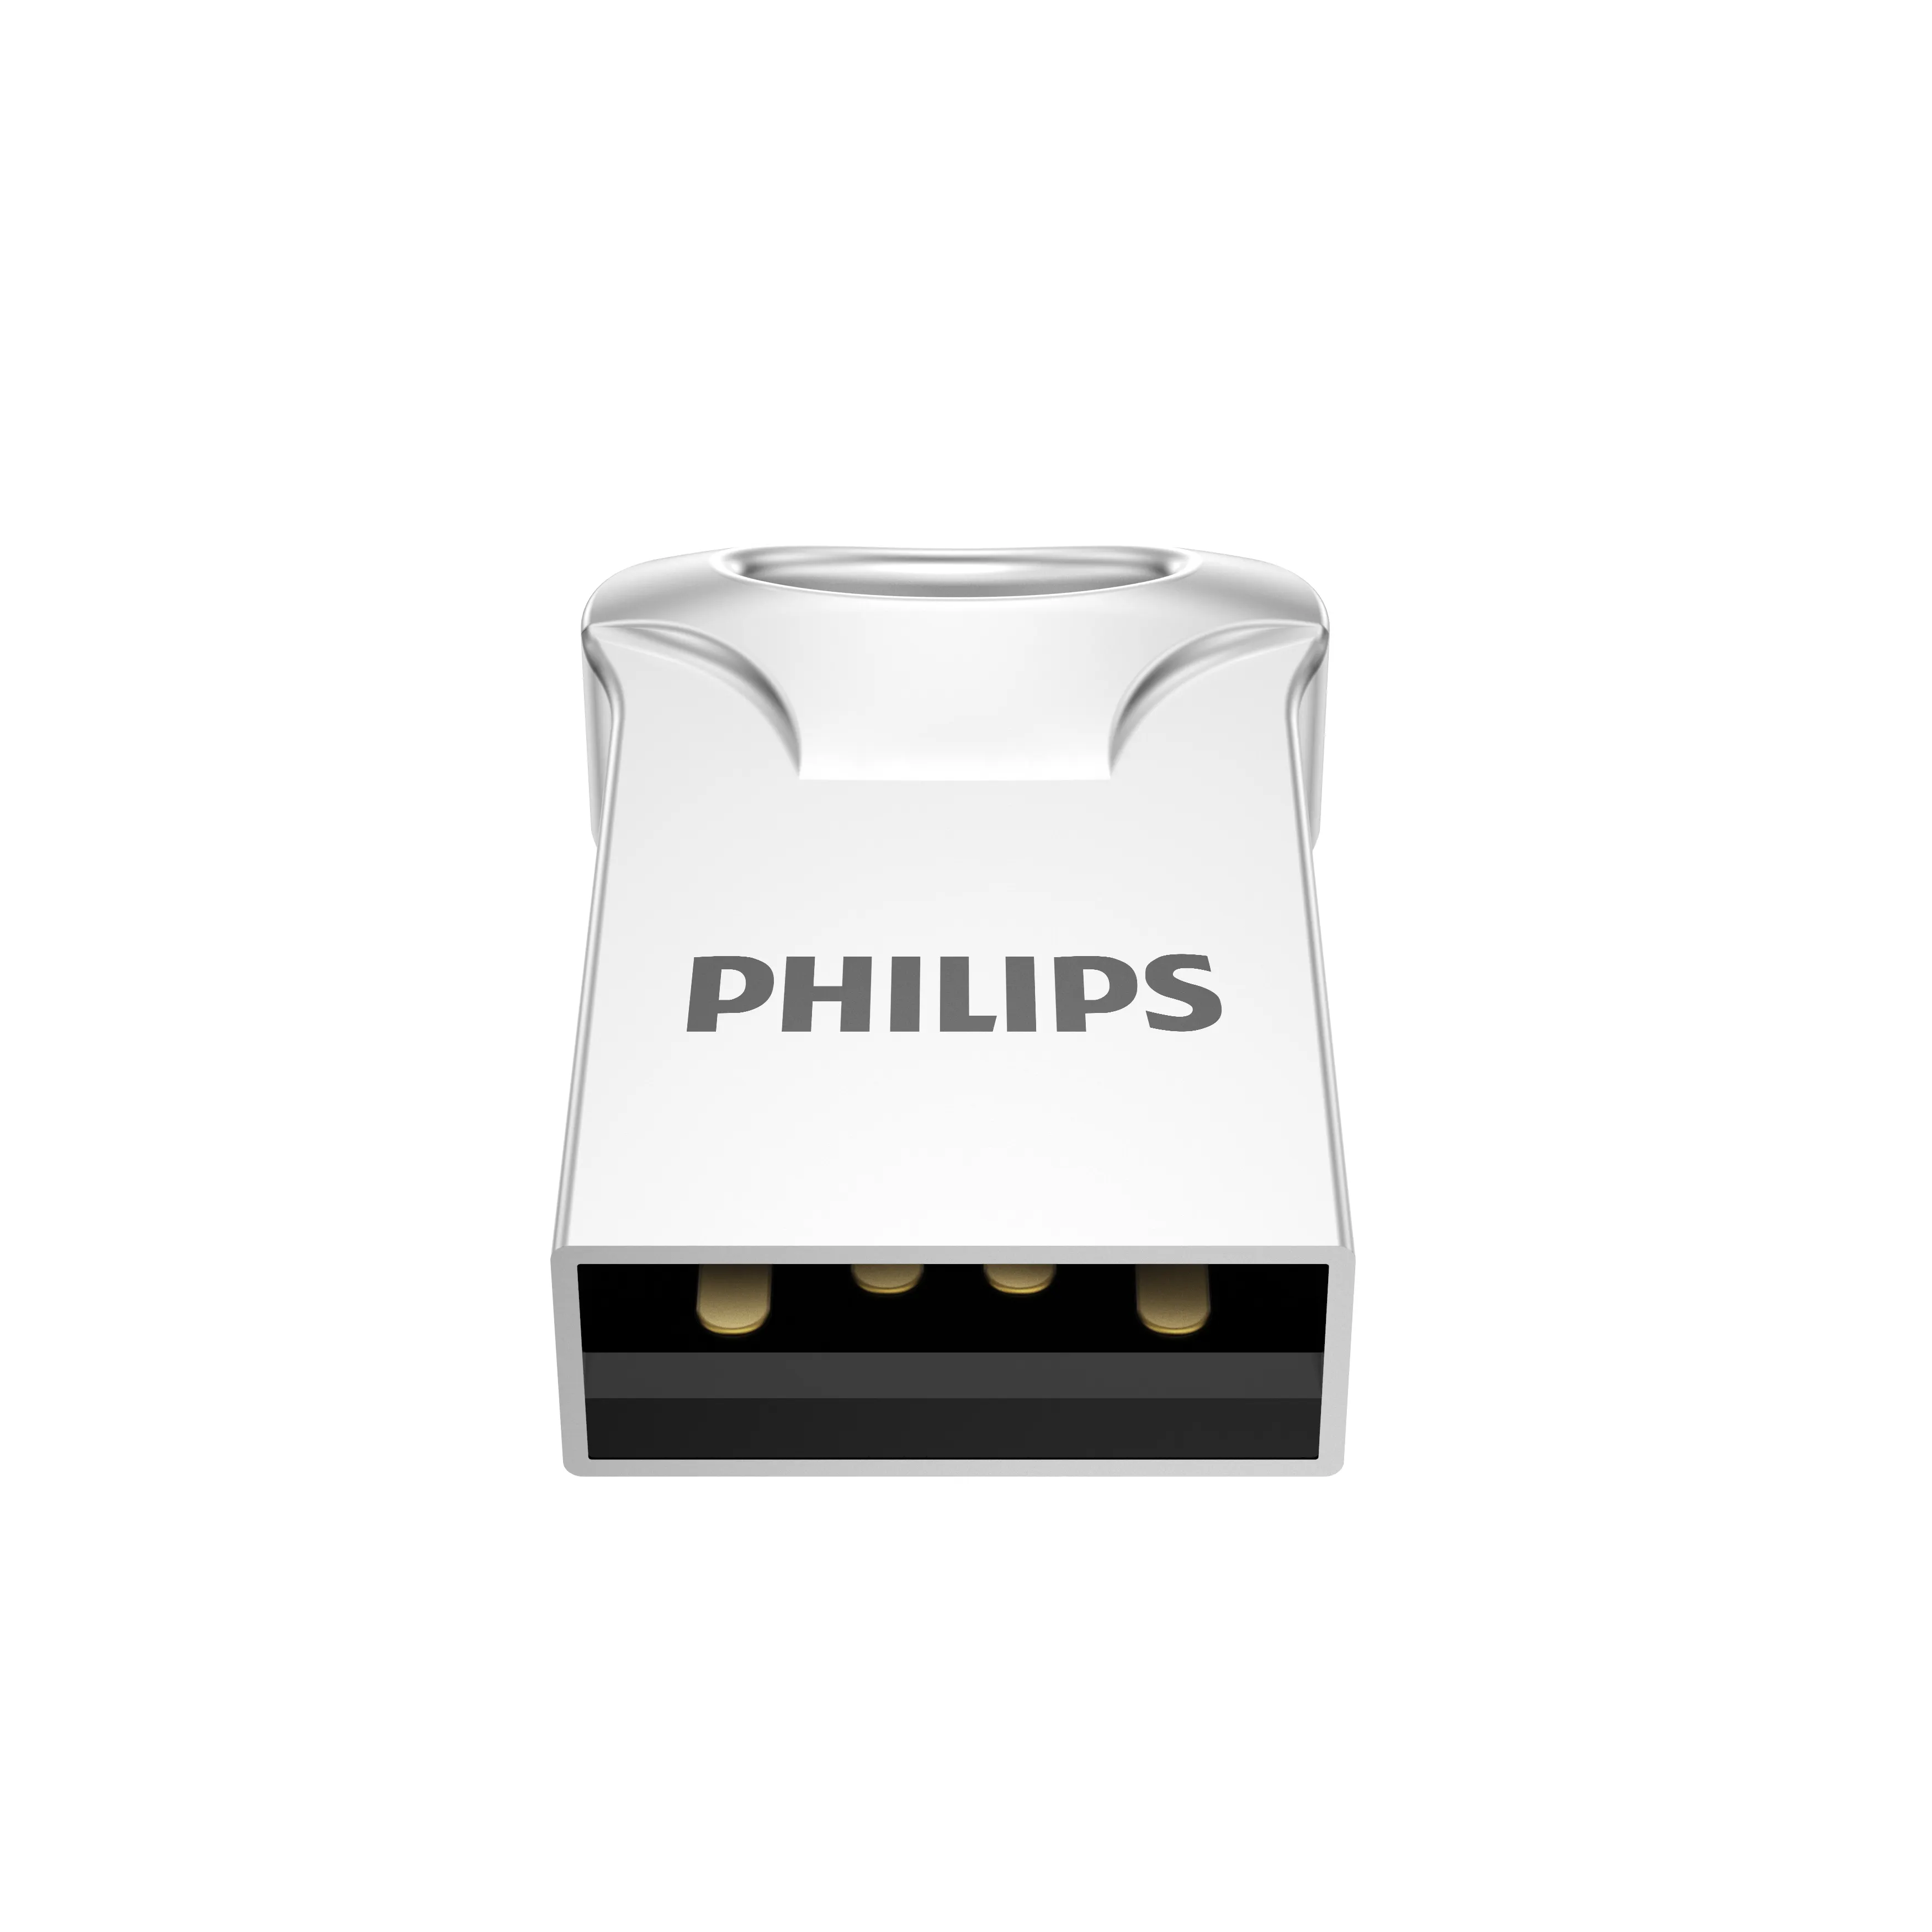 PHILIPS Usb Flash 2.0 Drive High Speed Chips Custom Usb Pen Drive Memory Flash Usb Flash Drive 3.0